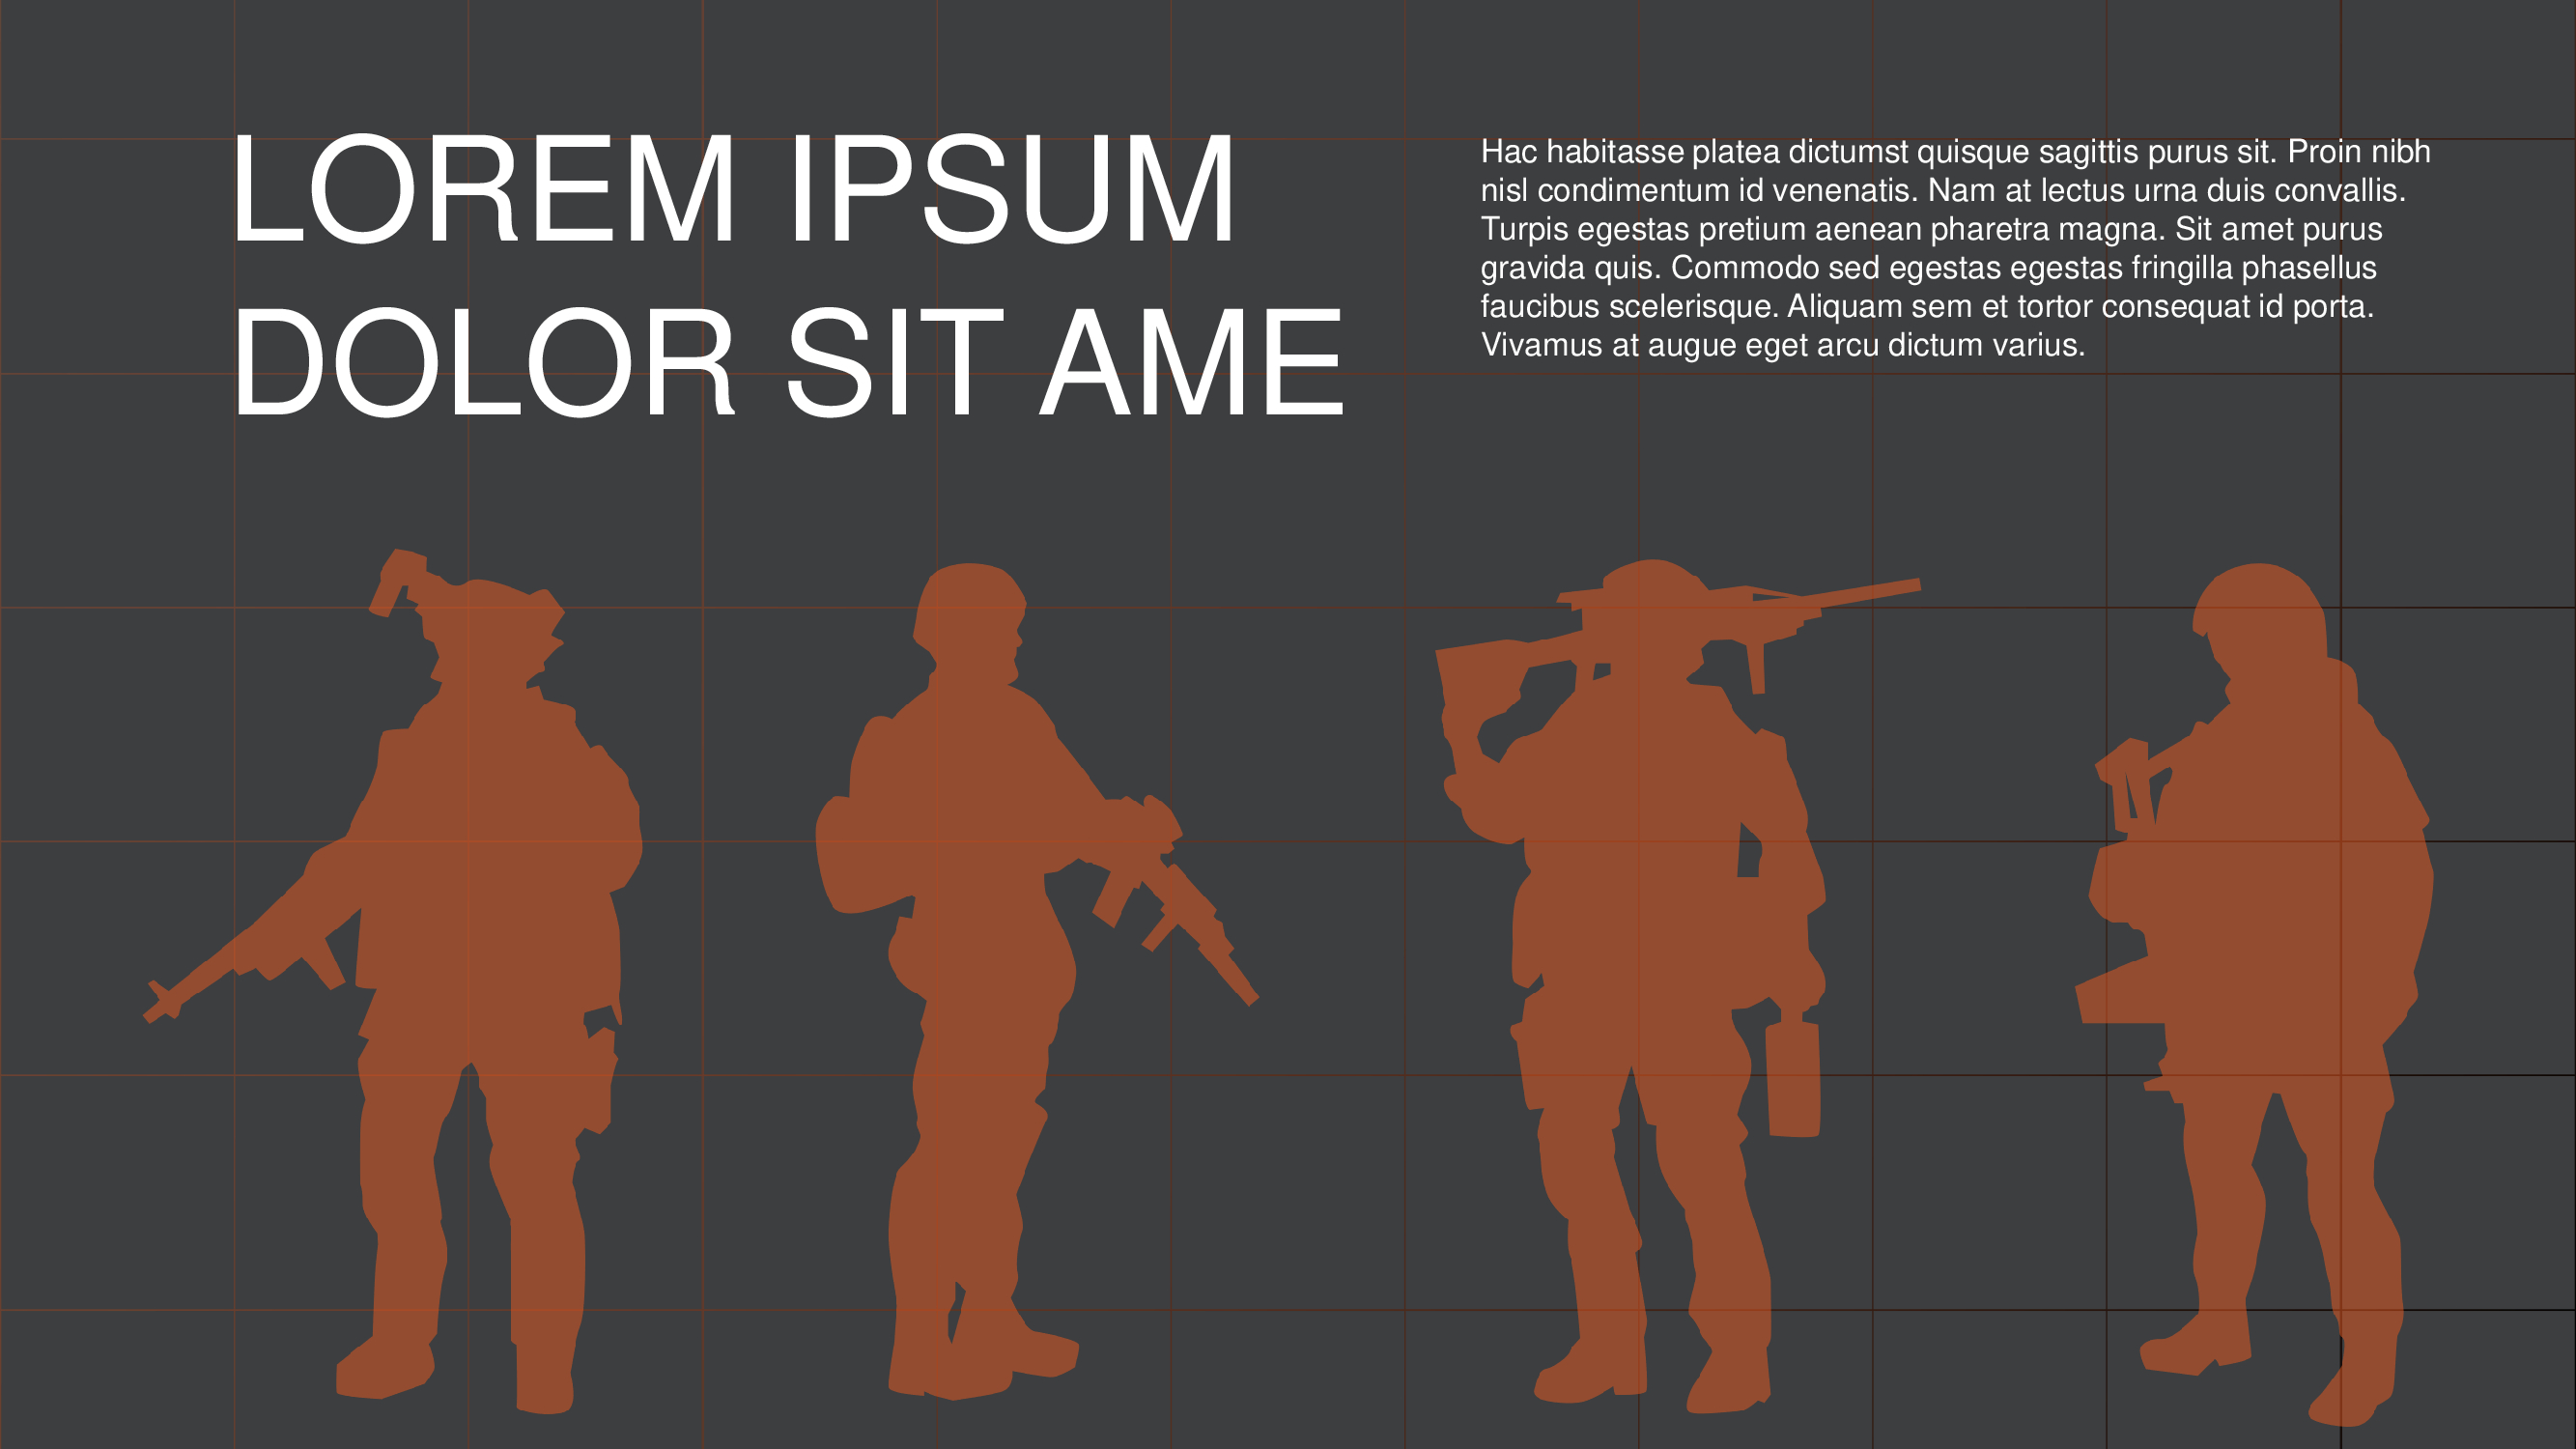 3 orange silhouette of an army and white lettering "LOrem ipsum dolor sit ame" on a gray background.